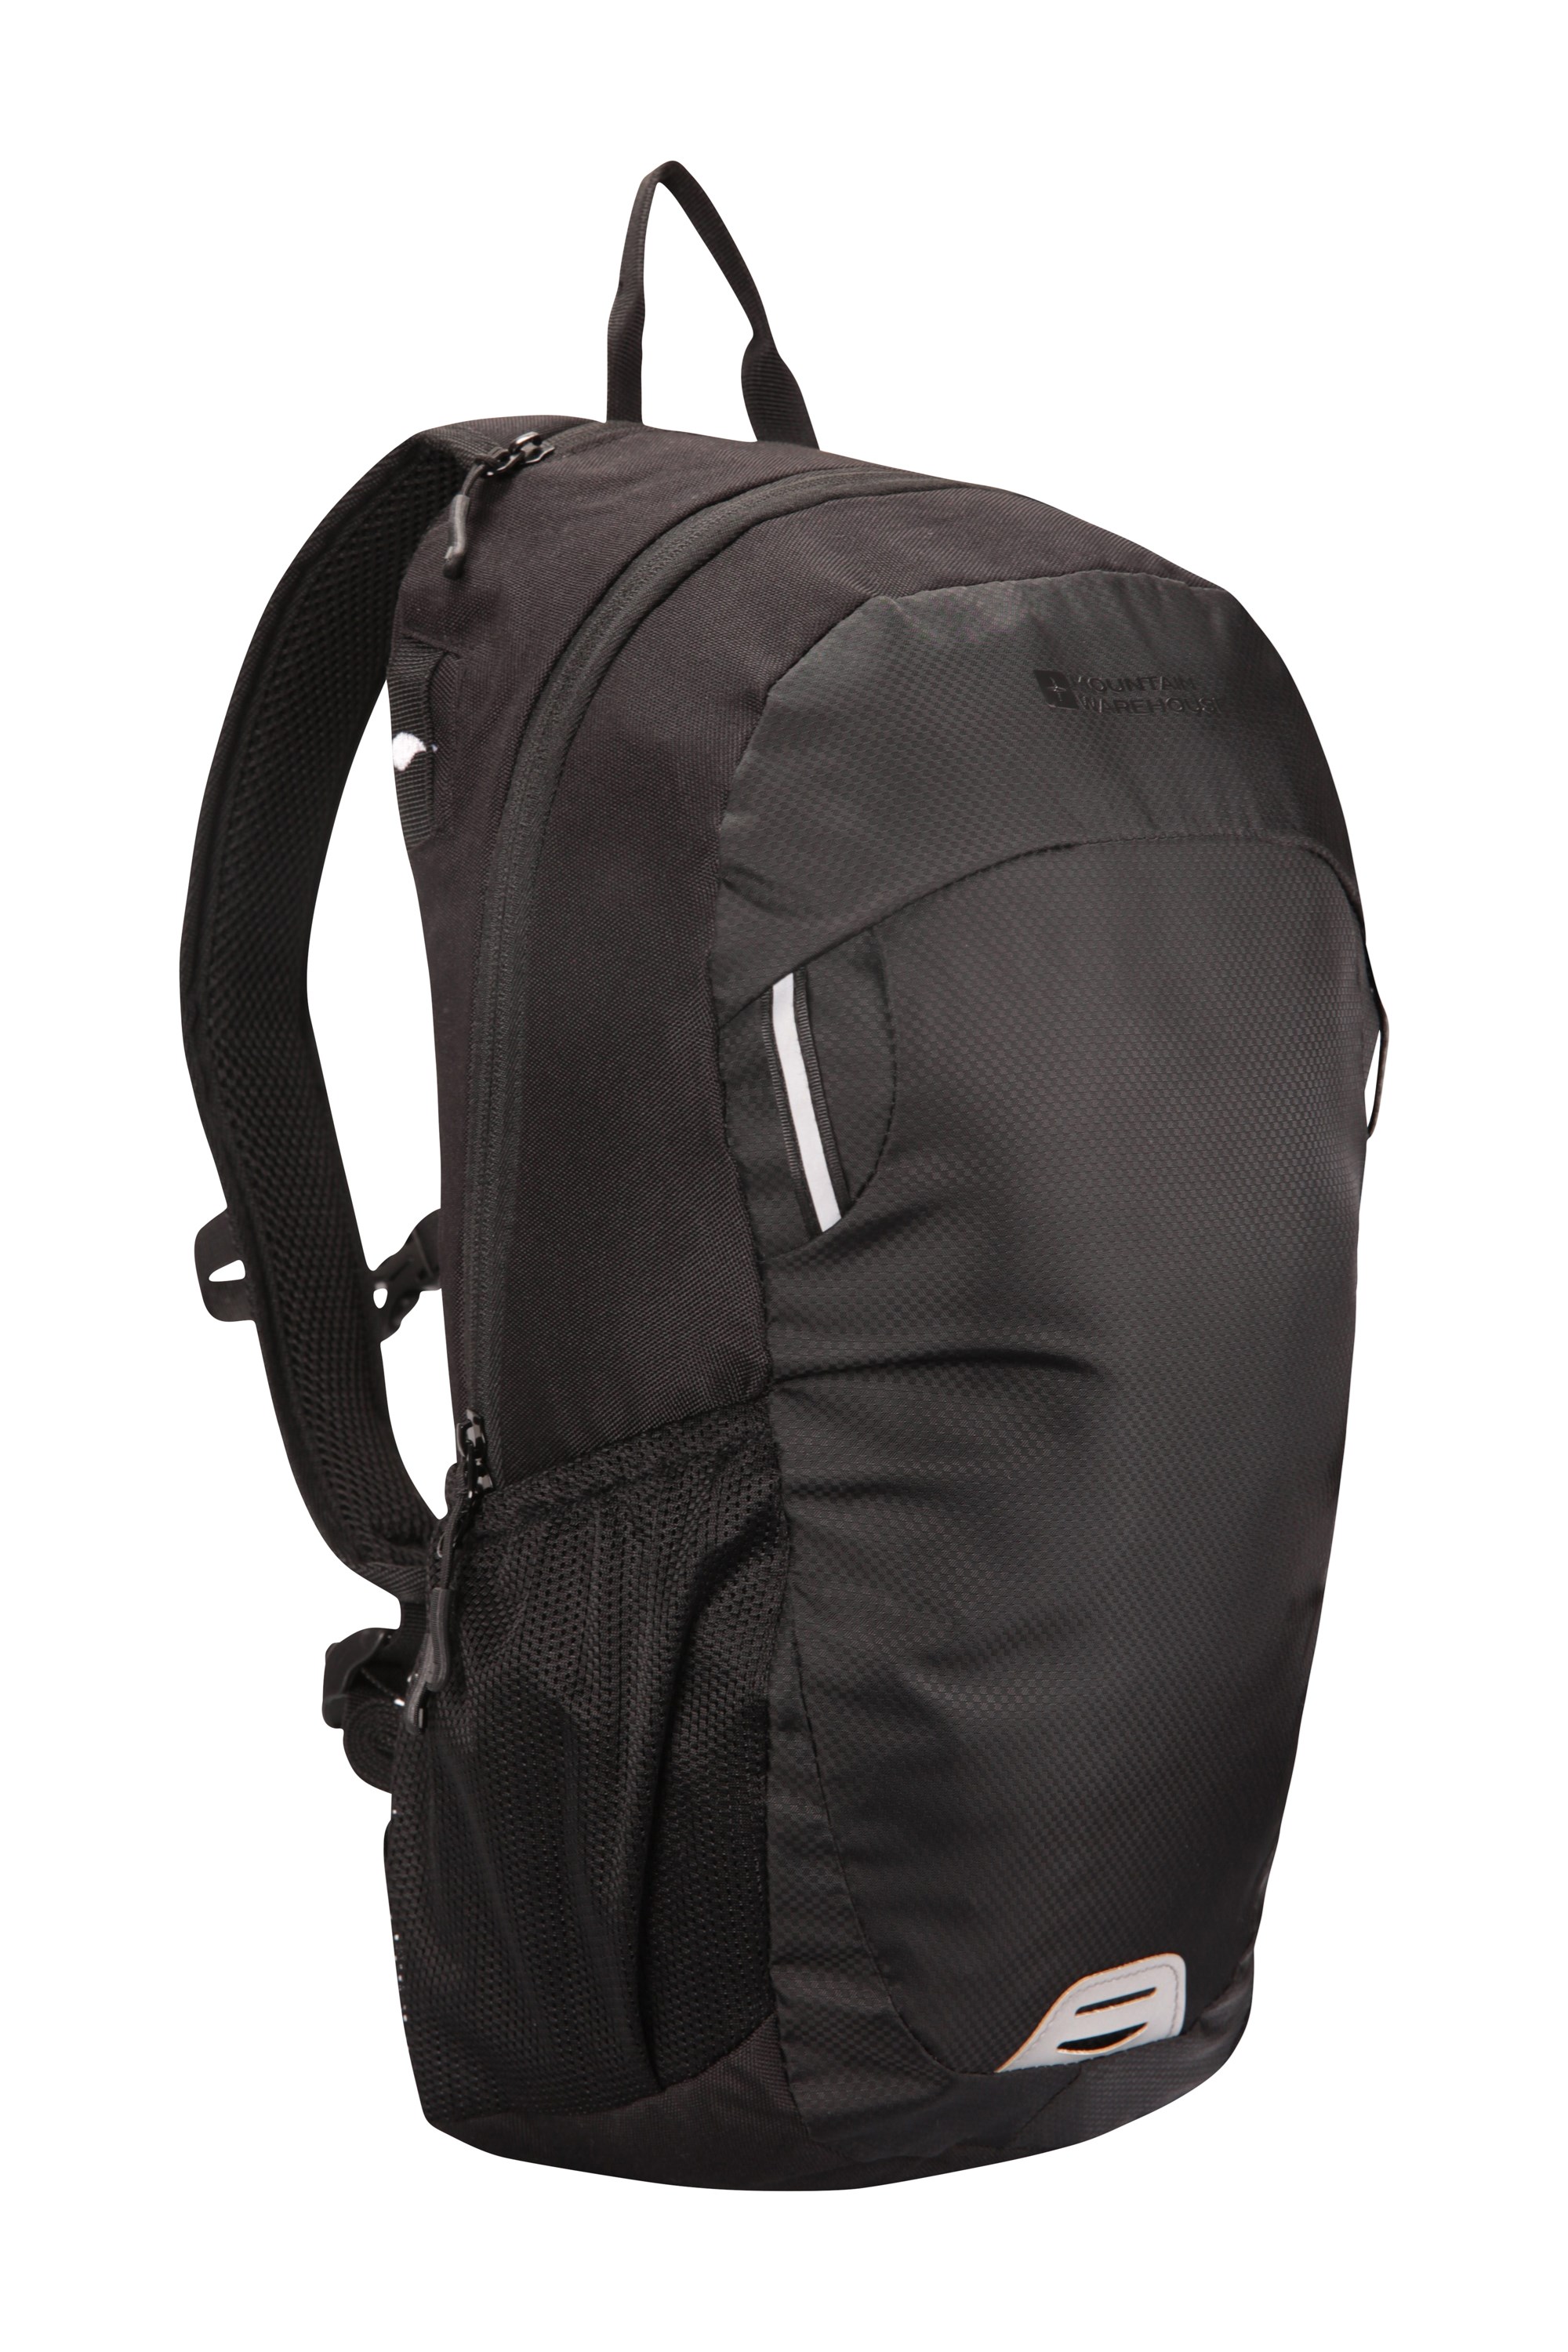 Mountain Warehouse Onyx 15L Backpack Reflective Details Outdoor Rucksack Hydration compatible